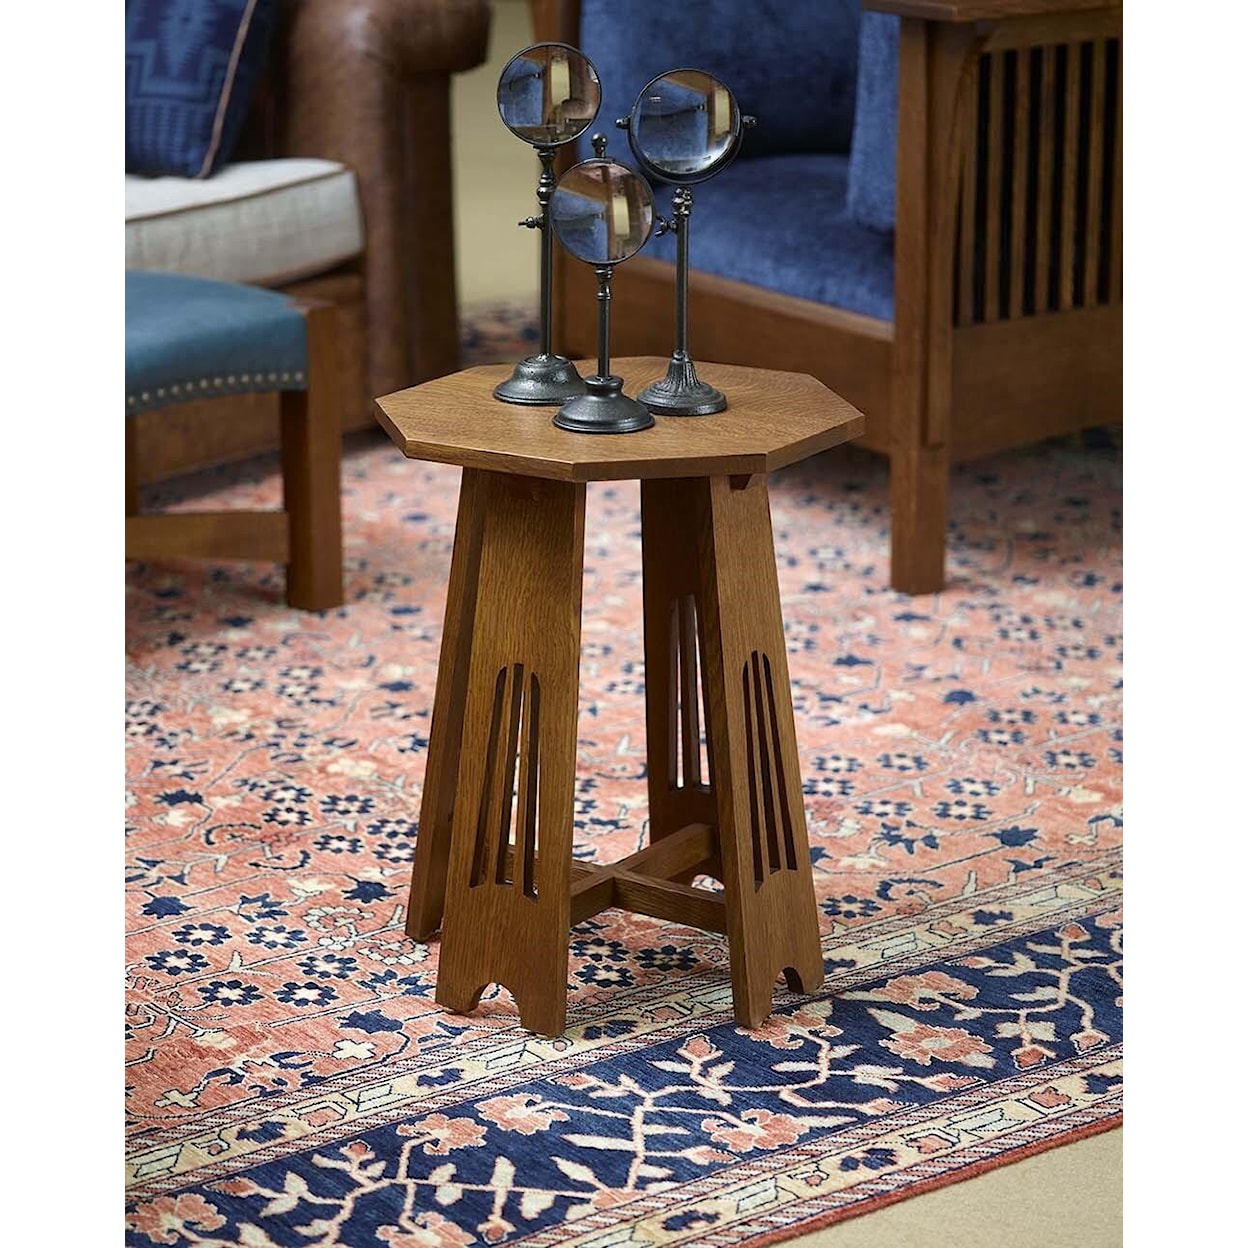 Stickley Little Treasures End Table